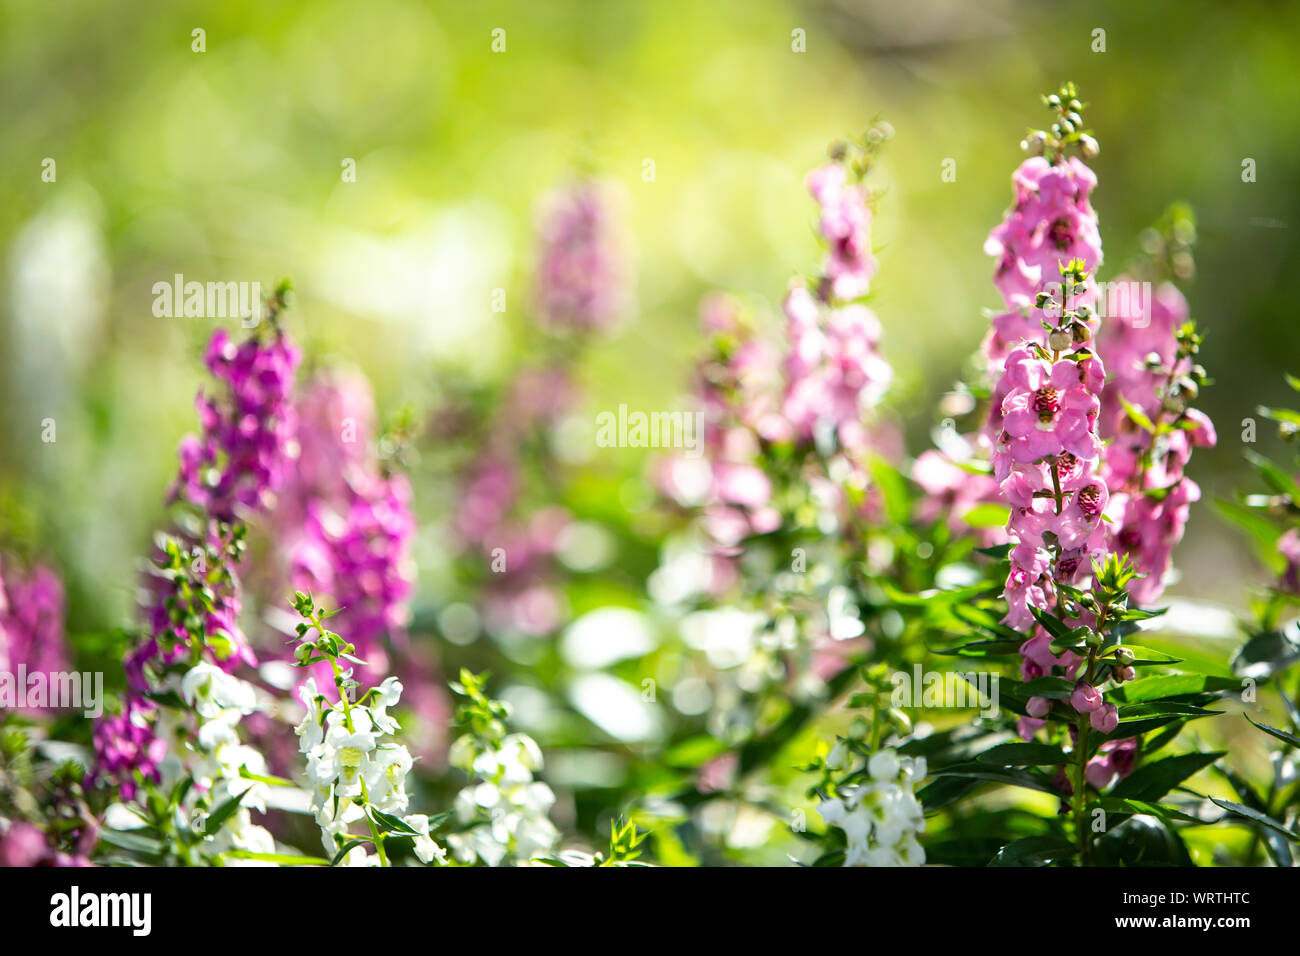 Salvia blooming in the garden, Pink , Purple colour flowers, Light and Shadow, Blurred and bokeh background, Selective focus Stock Photo